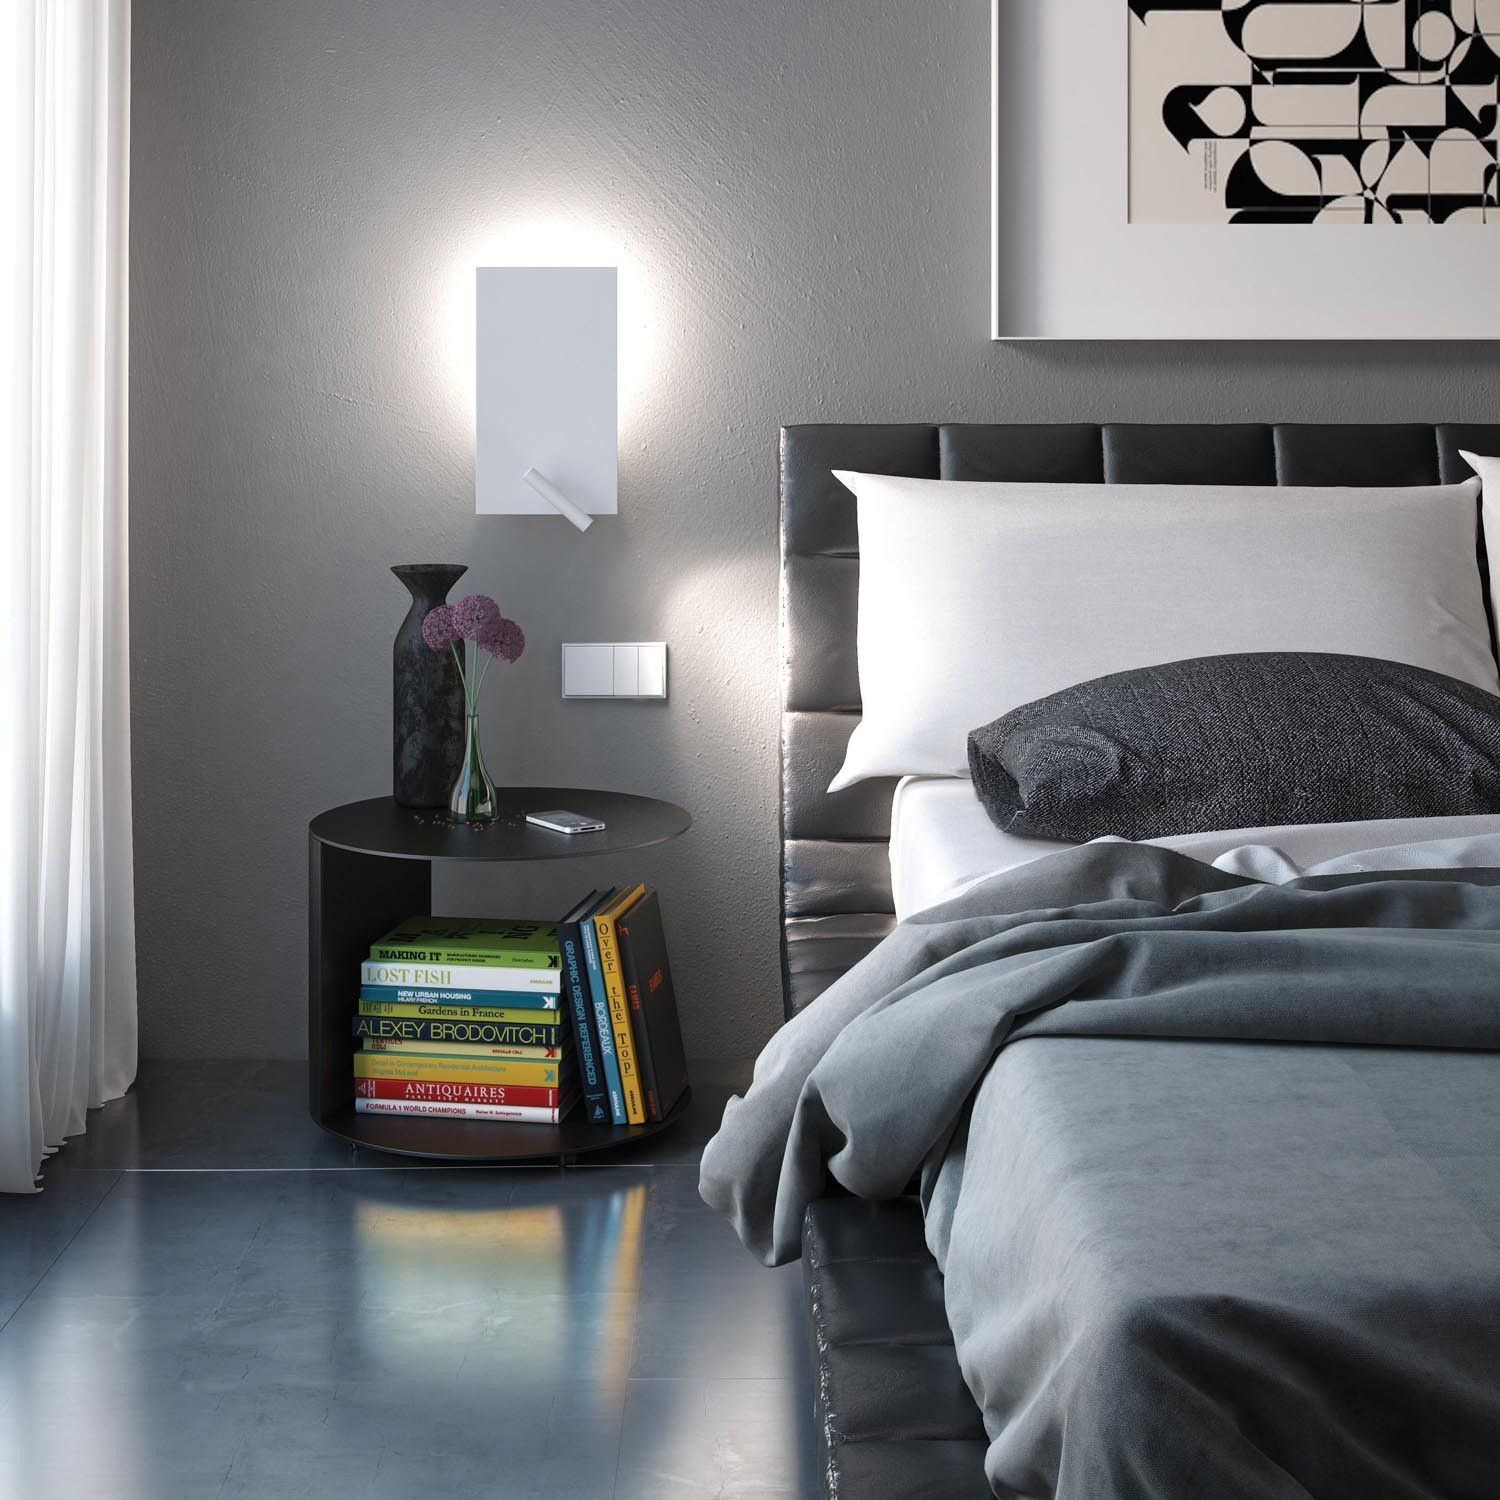 Modern Bedroom Sconces
 Trend Wall Sconces in the Bedroom